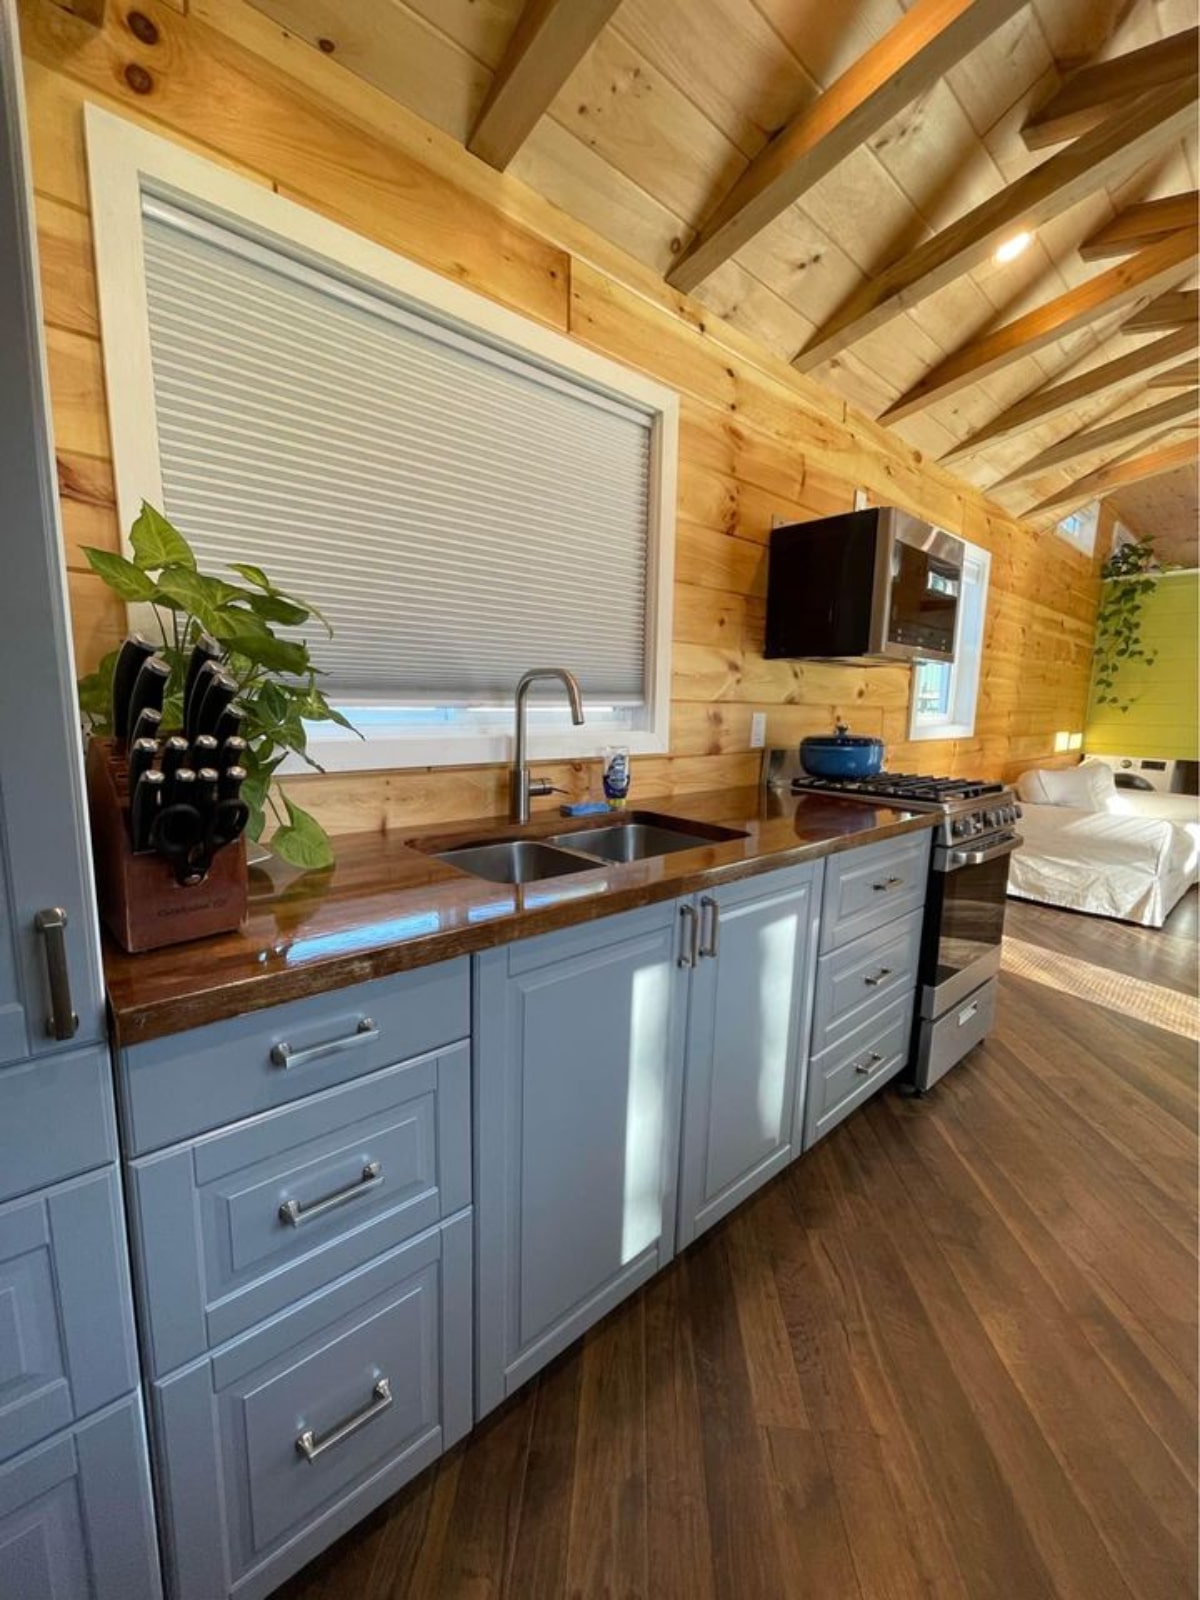 Well equipped kitchen area of 40' Tiny House has gas stove, microwave, double sink and pantry.